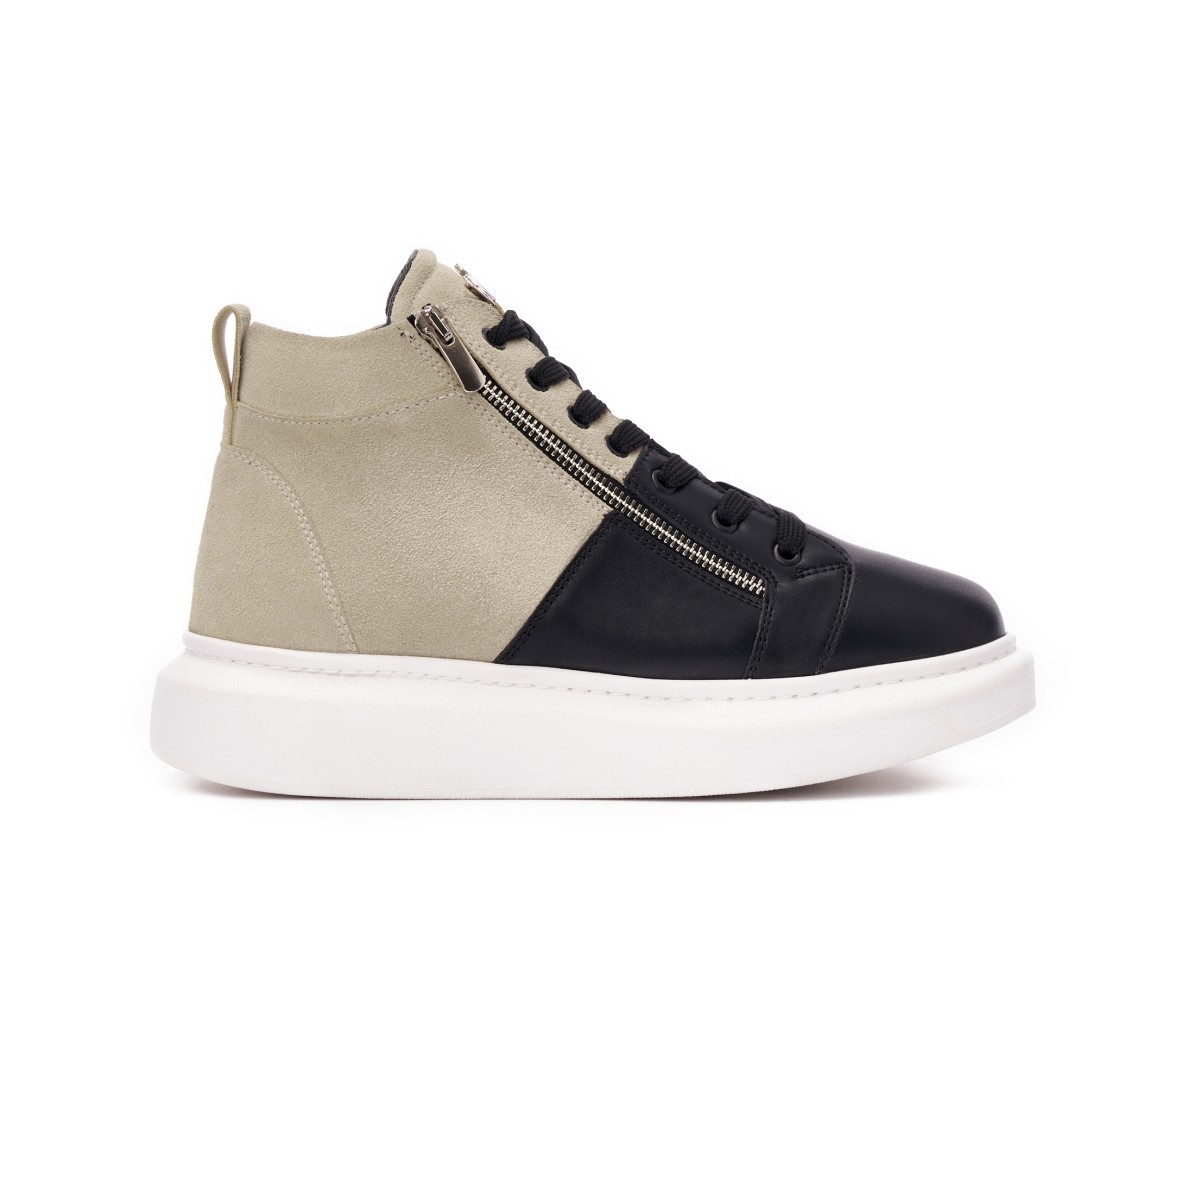 Hype Sole Zipped Style High Top Sneakers in Cream-Black - Чёрный